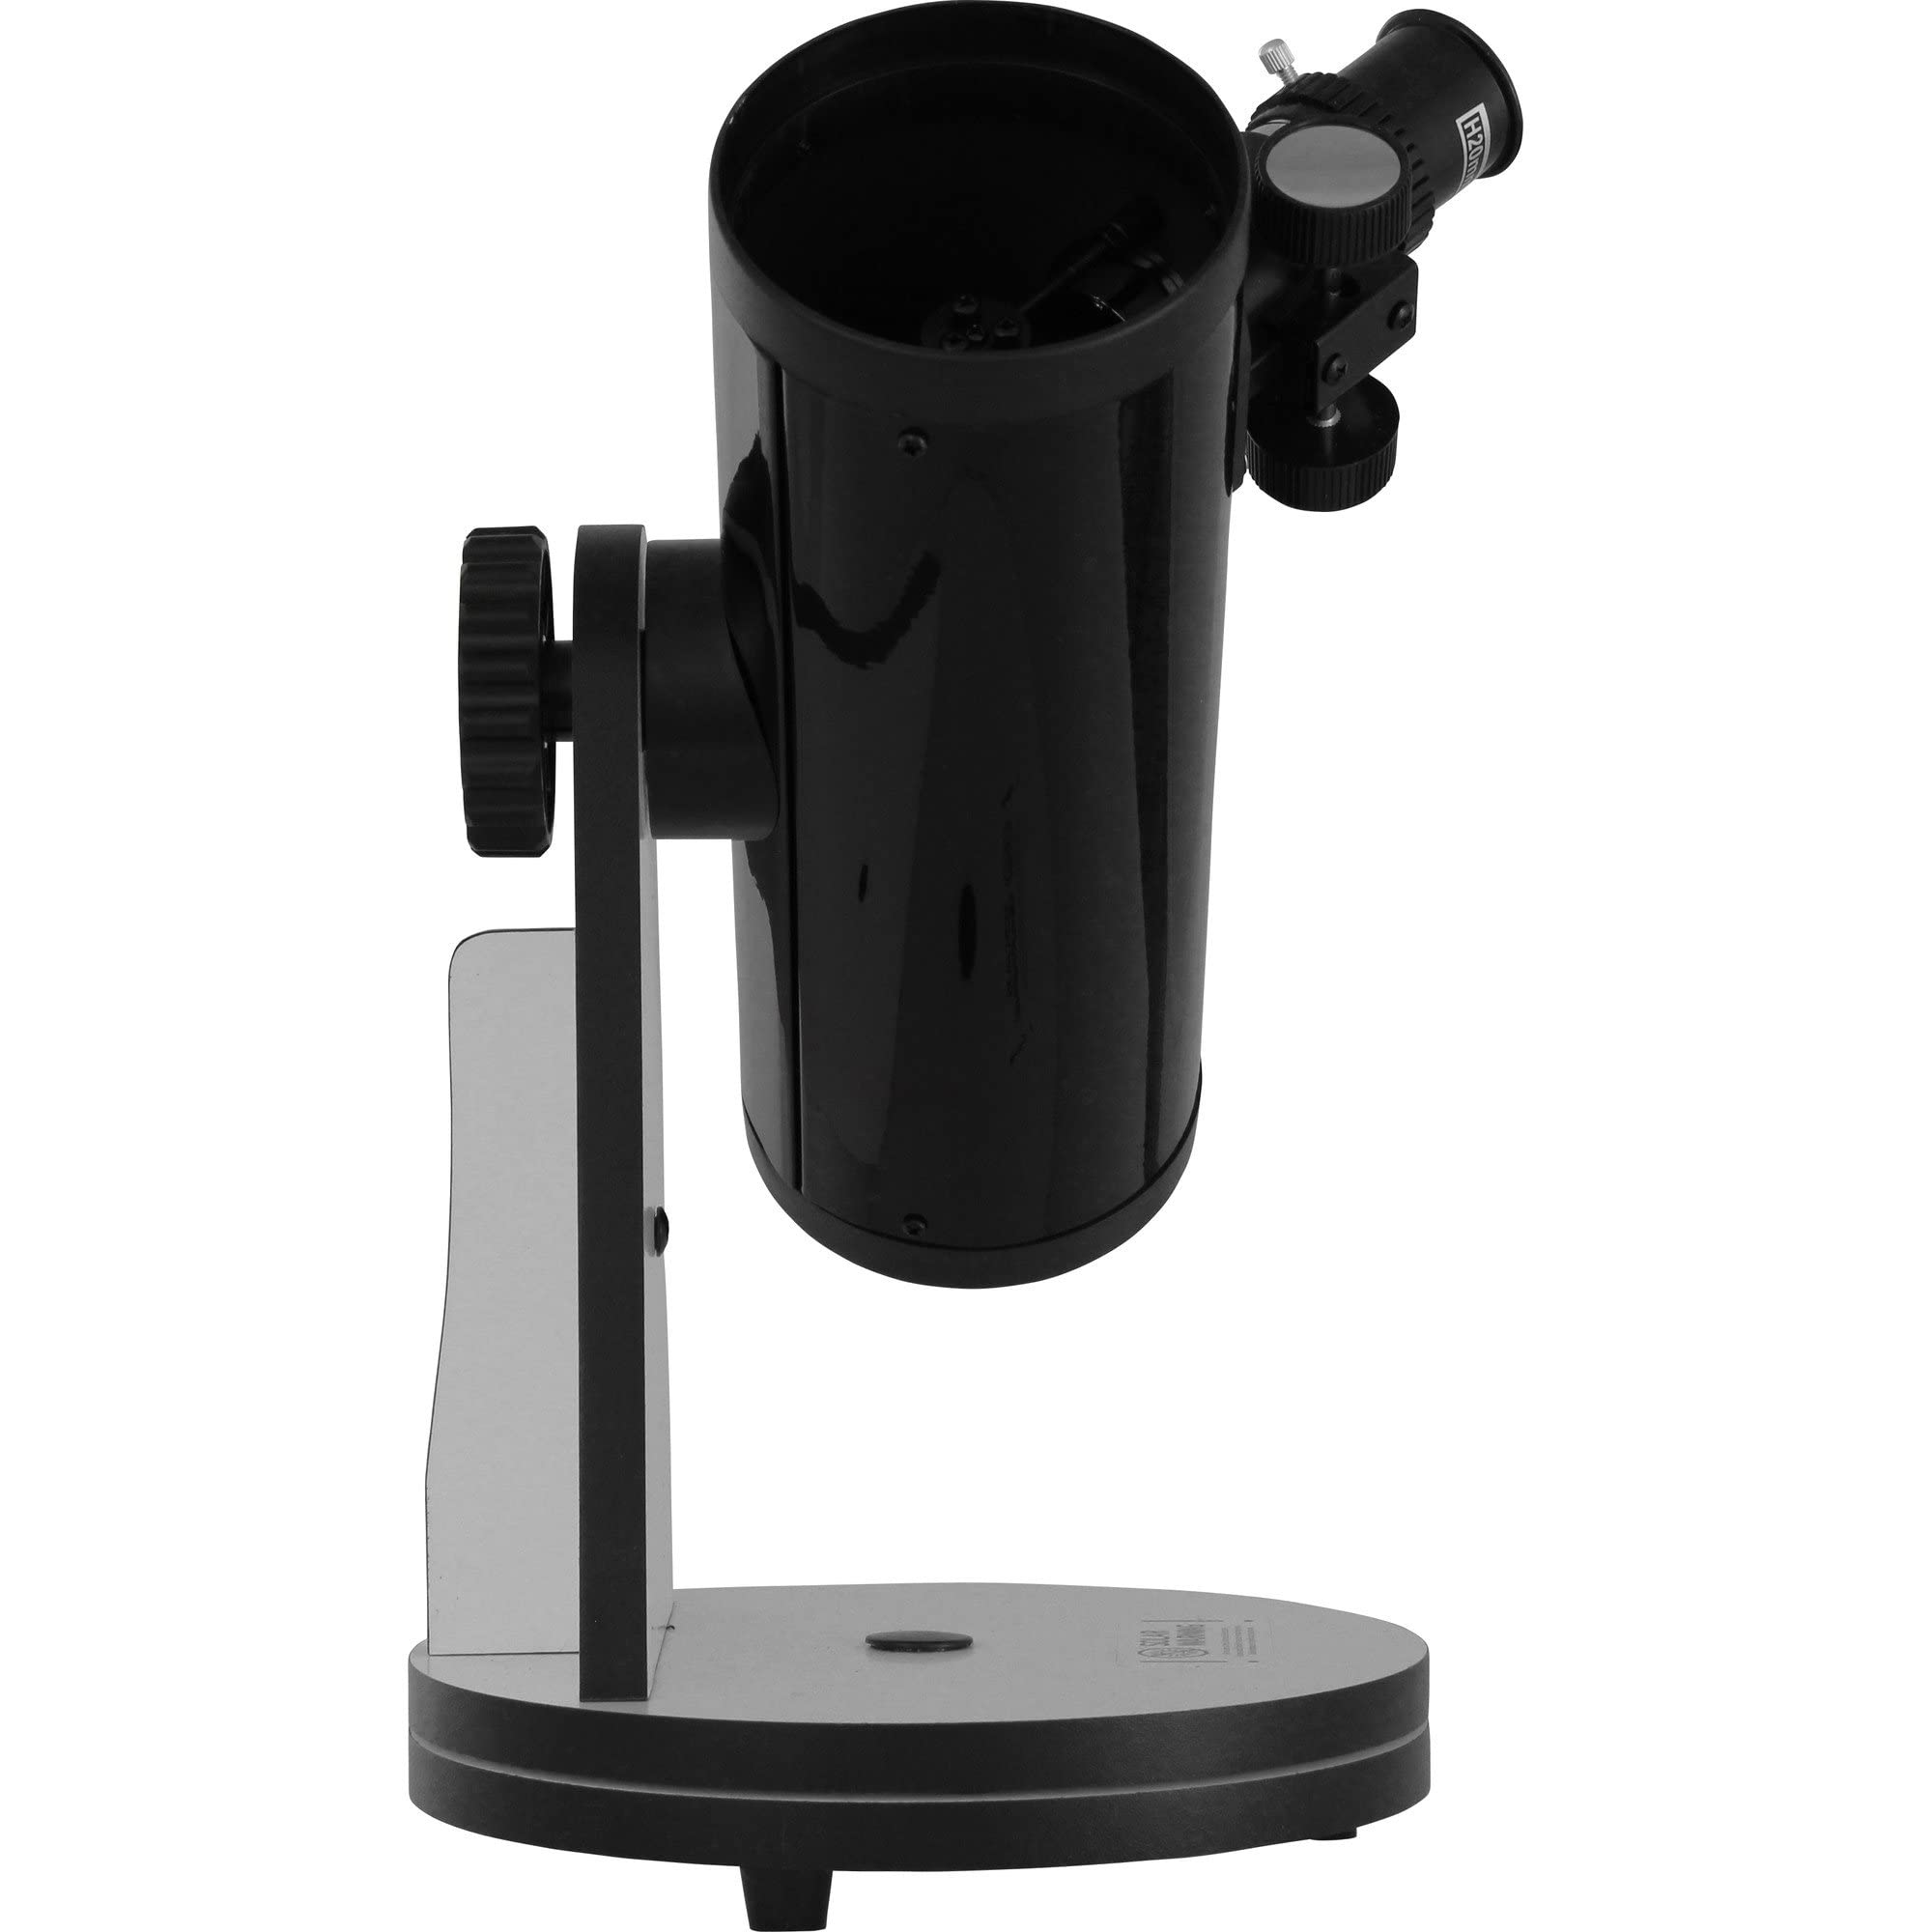 Omegon N 76/300 Dobsonian Telescope with 76mm Aperture and 300mm Focal Length